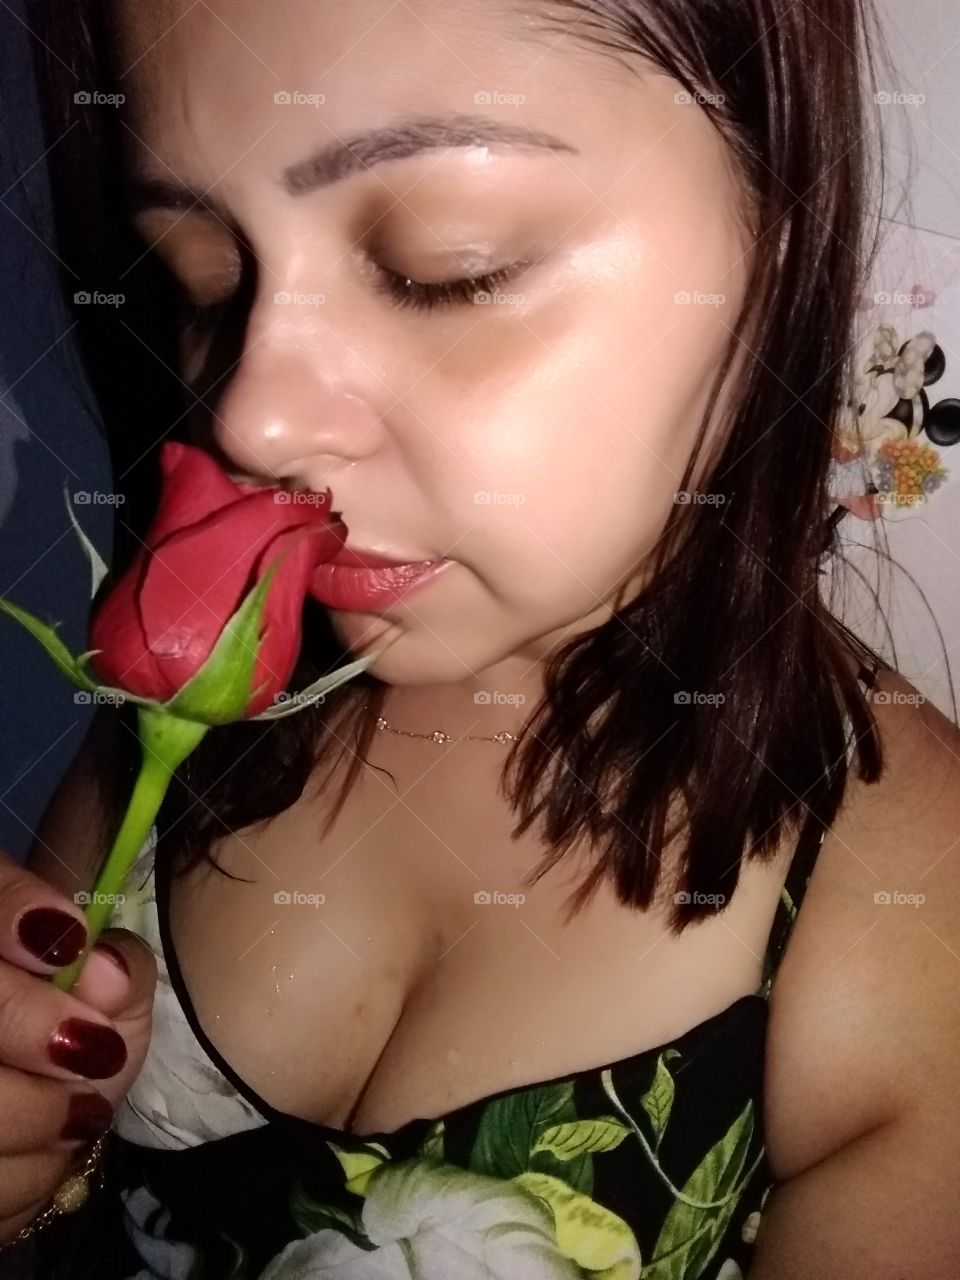 In love. Rose. Smell. Skin. Face. Woman. Girl. Lips. Flowers.